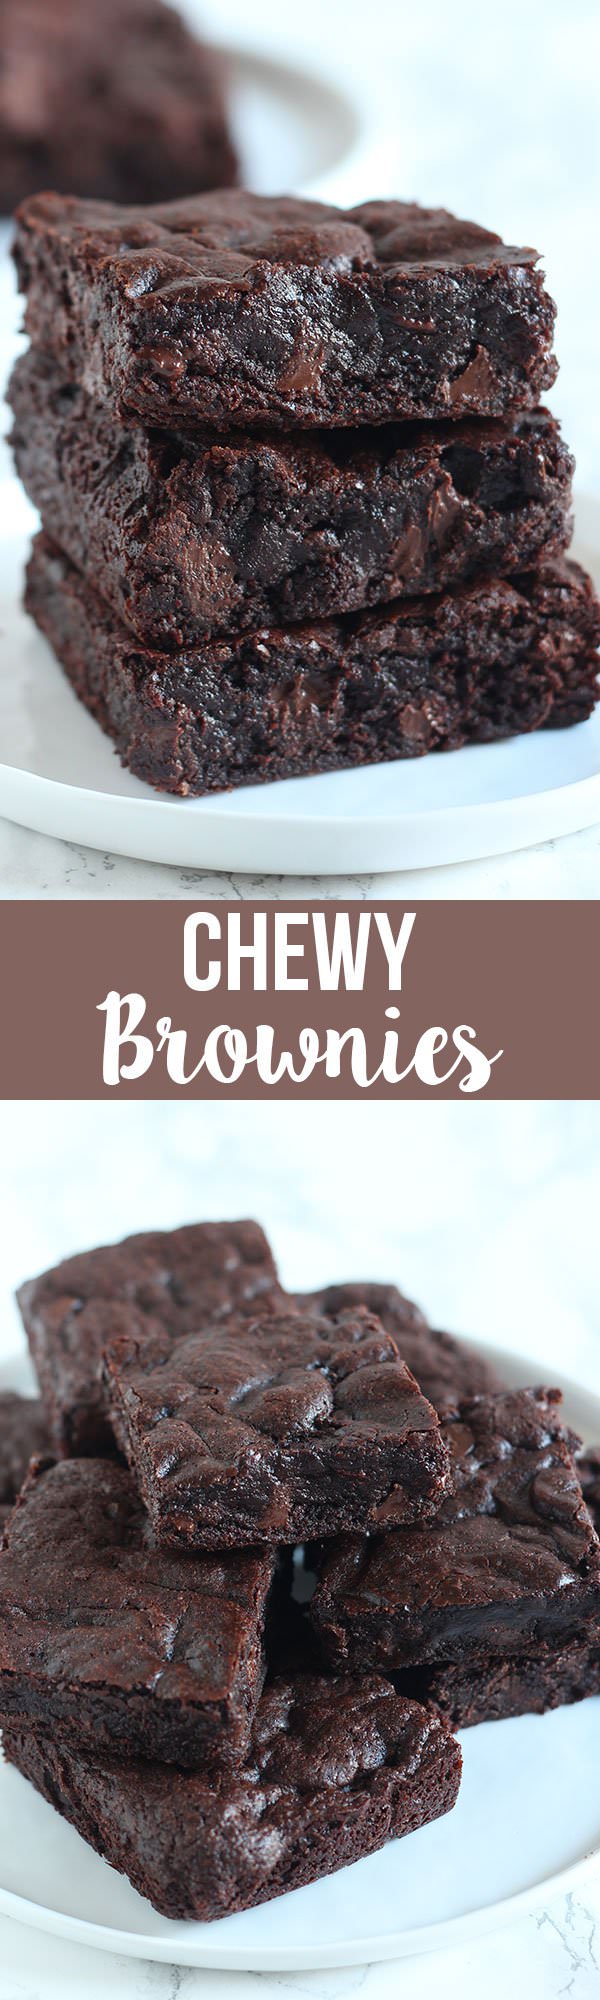 If you love box mix brownies, you’ll love these chewy chocolate brownies for their chewiness and easy to make recipe.